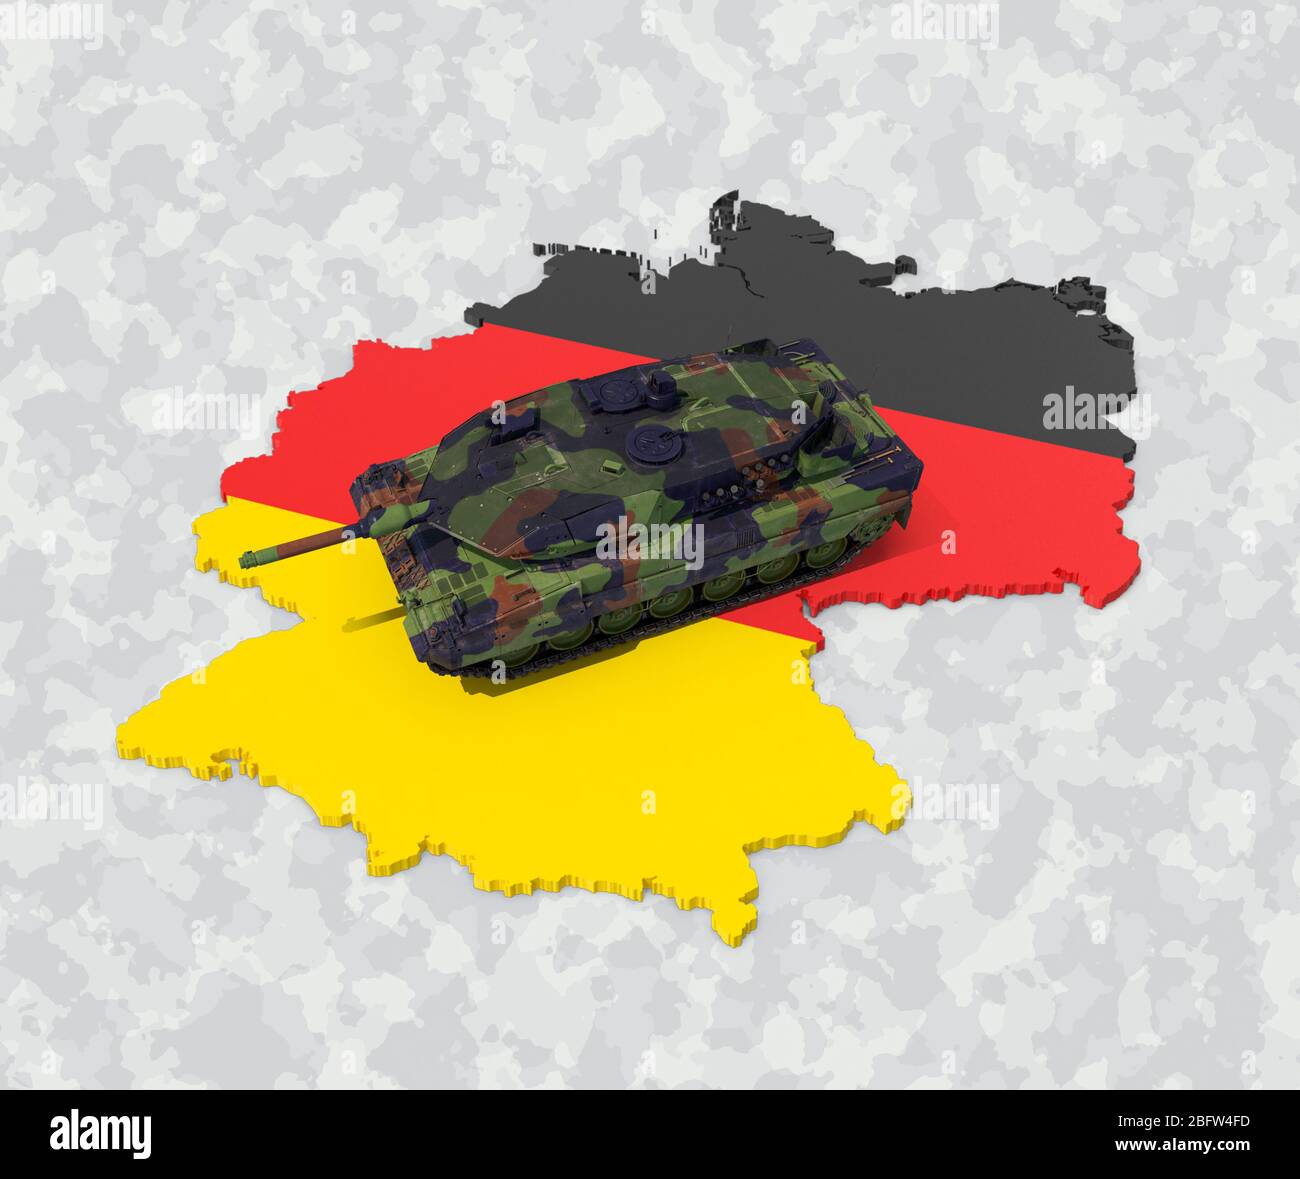 German main battle tank stands on german map silhouette Stock Photo